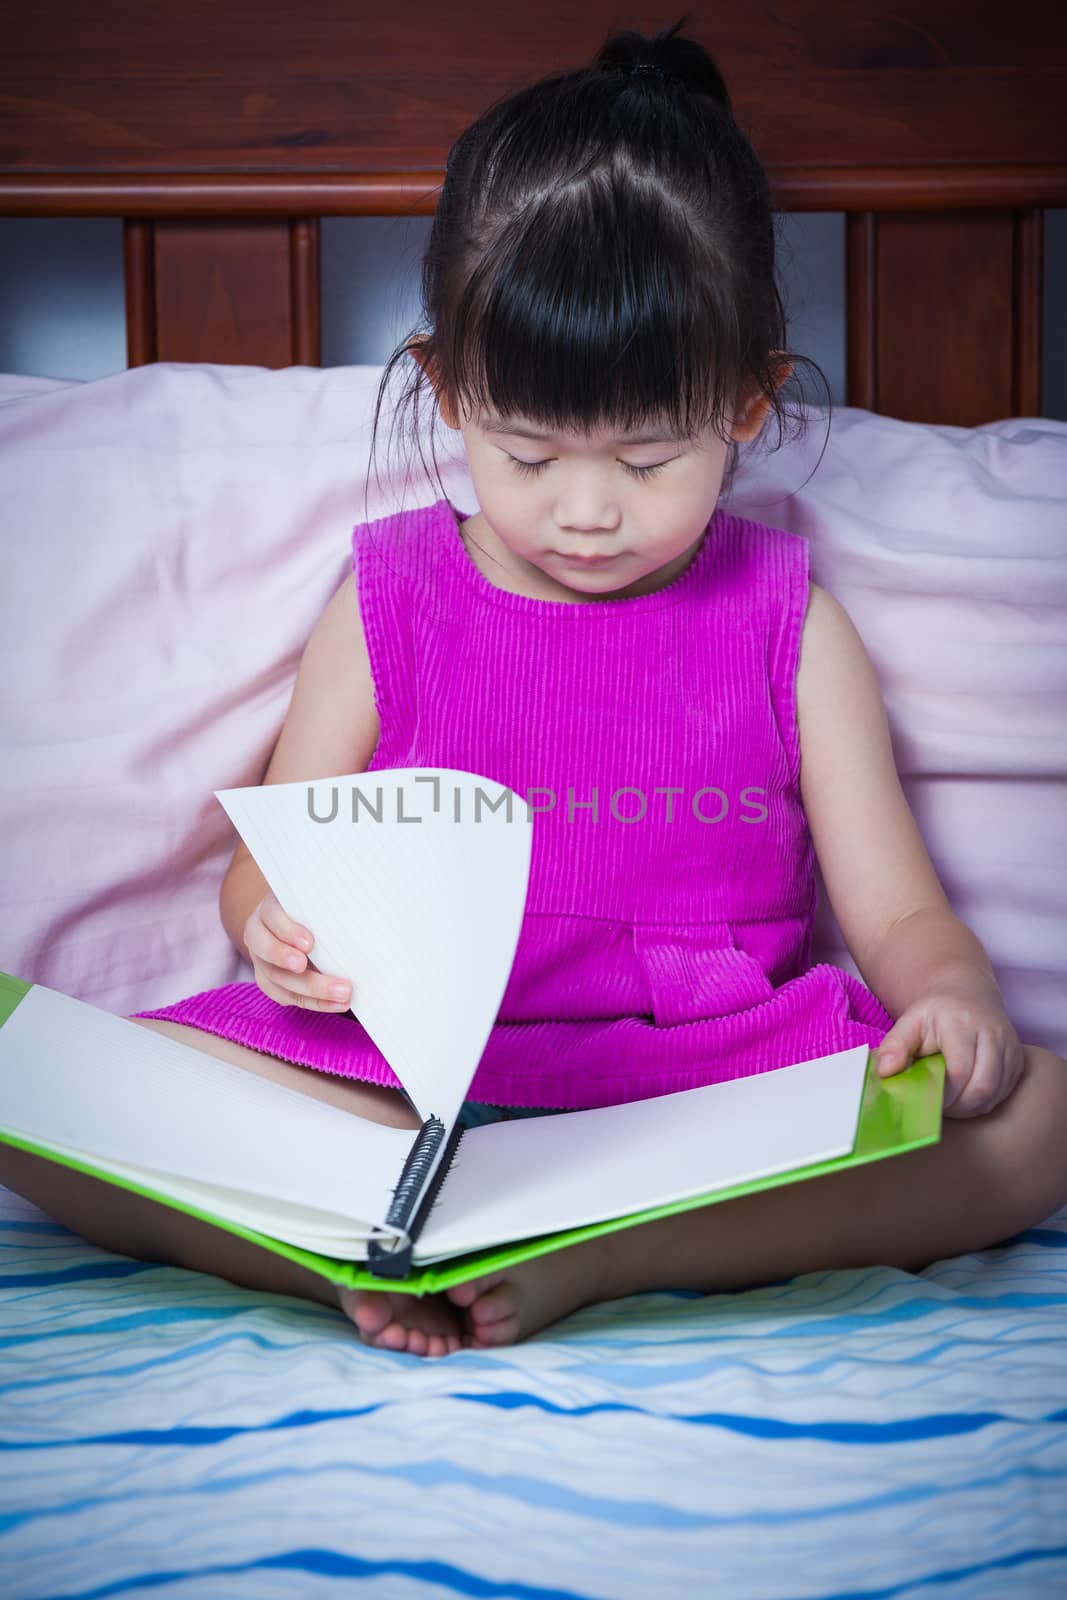 A little cute asian girl in a purple dress sleeping when she read a book on bed in bedroom. Children read and study, sleepy, tired student, education concept.